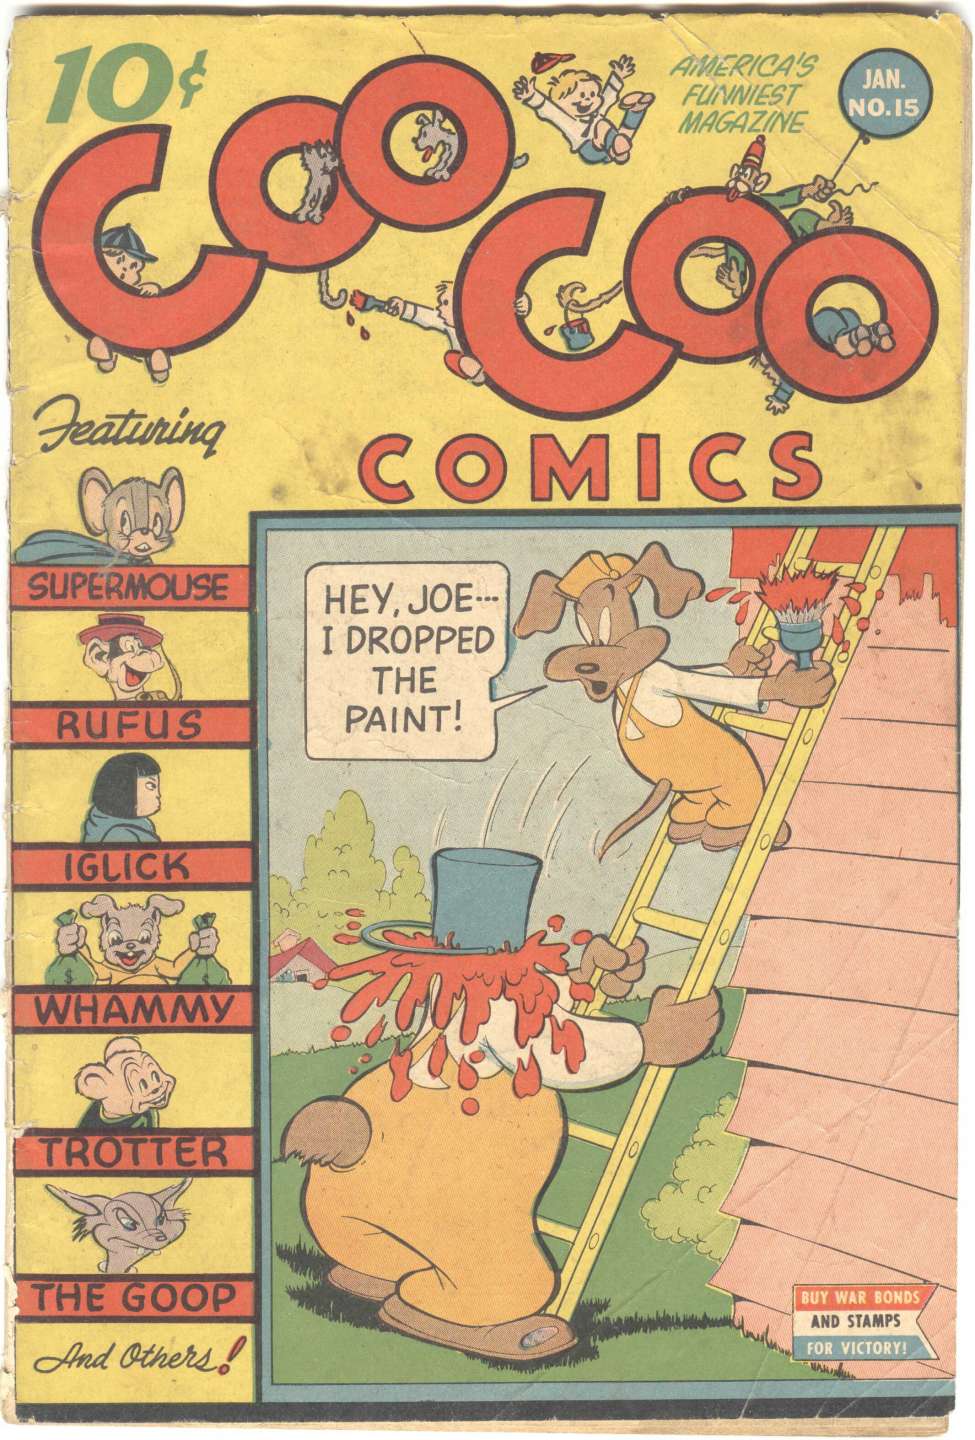 Comic Book Cover For Coo Coo Comics 15 - Version 1